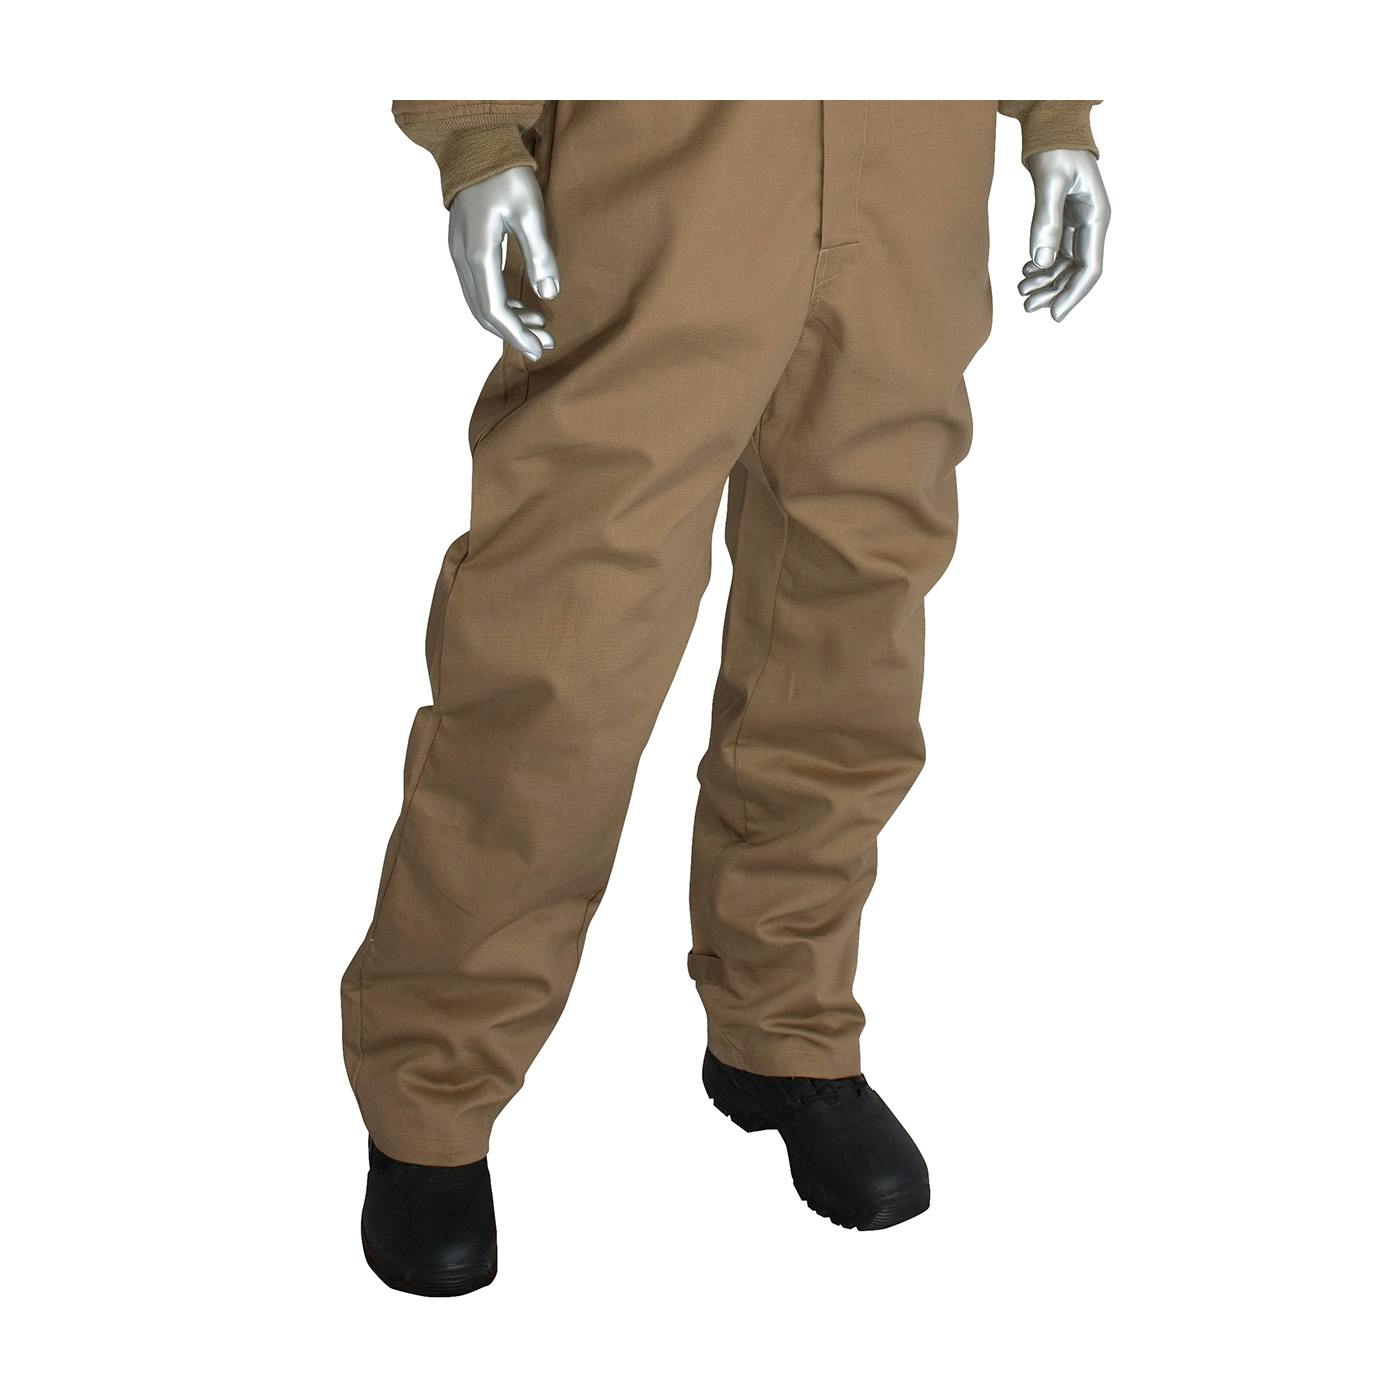 AR/FR Dual Certified Coverall with Insect Repellant - 8 Cal/cm2, Tan (9100-2110D)